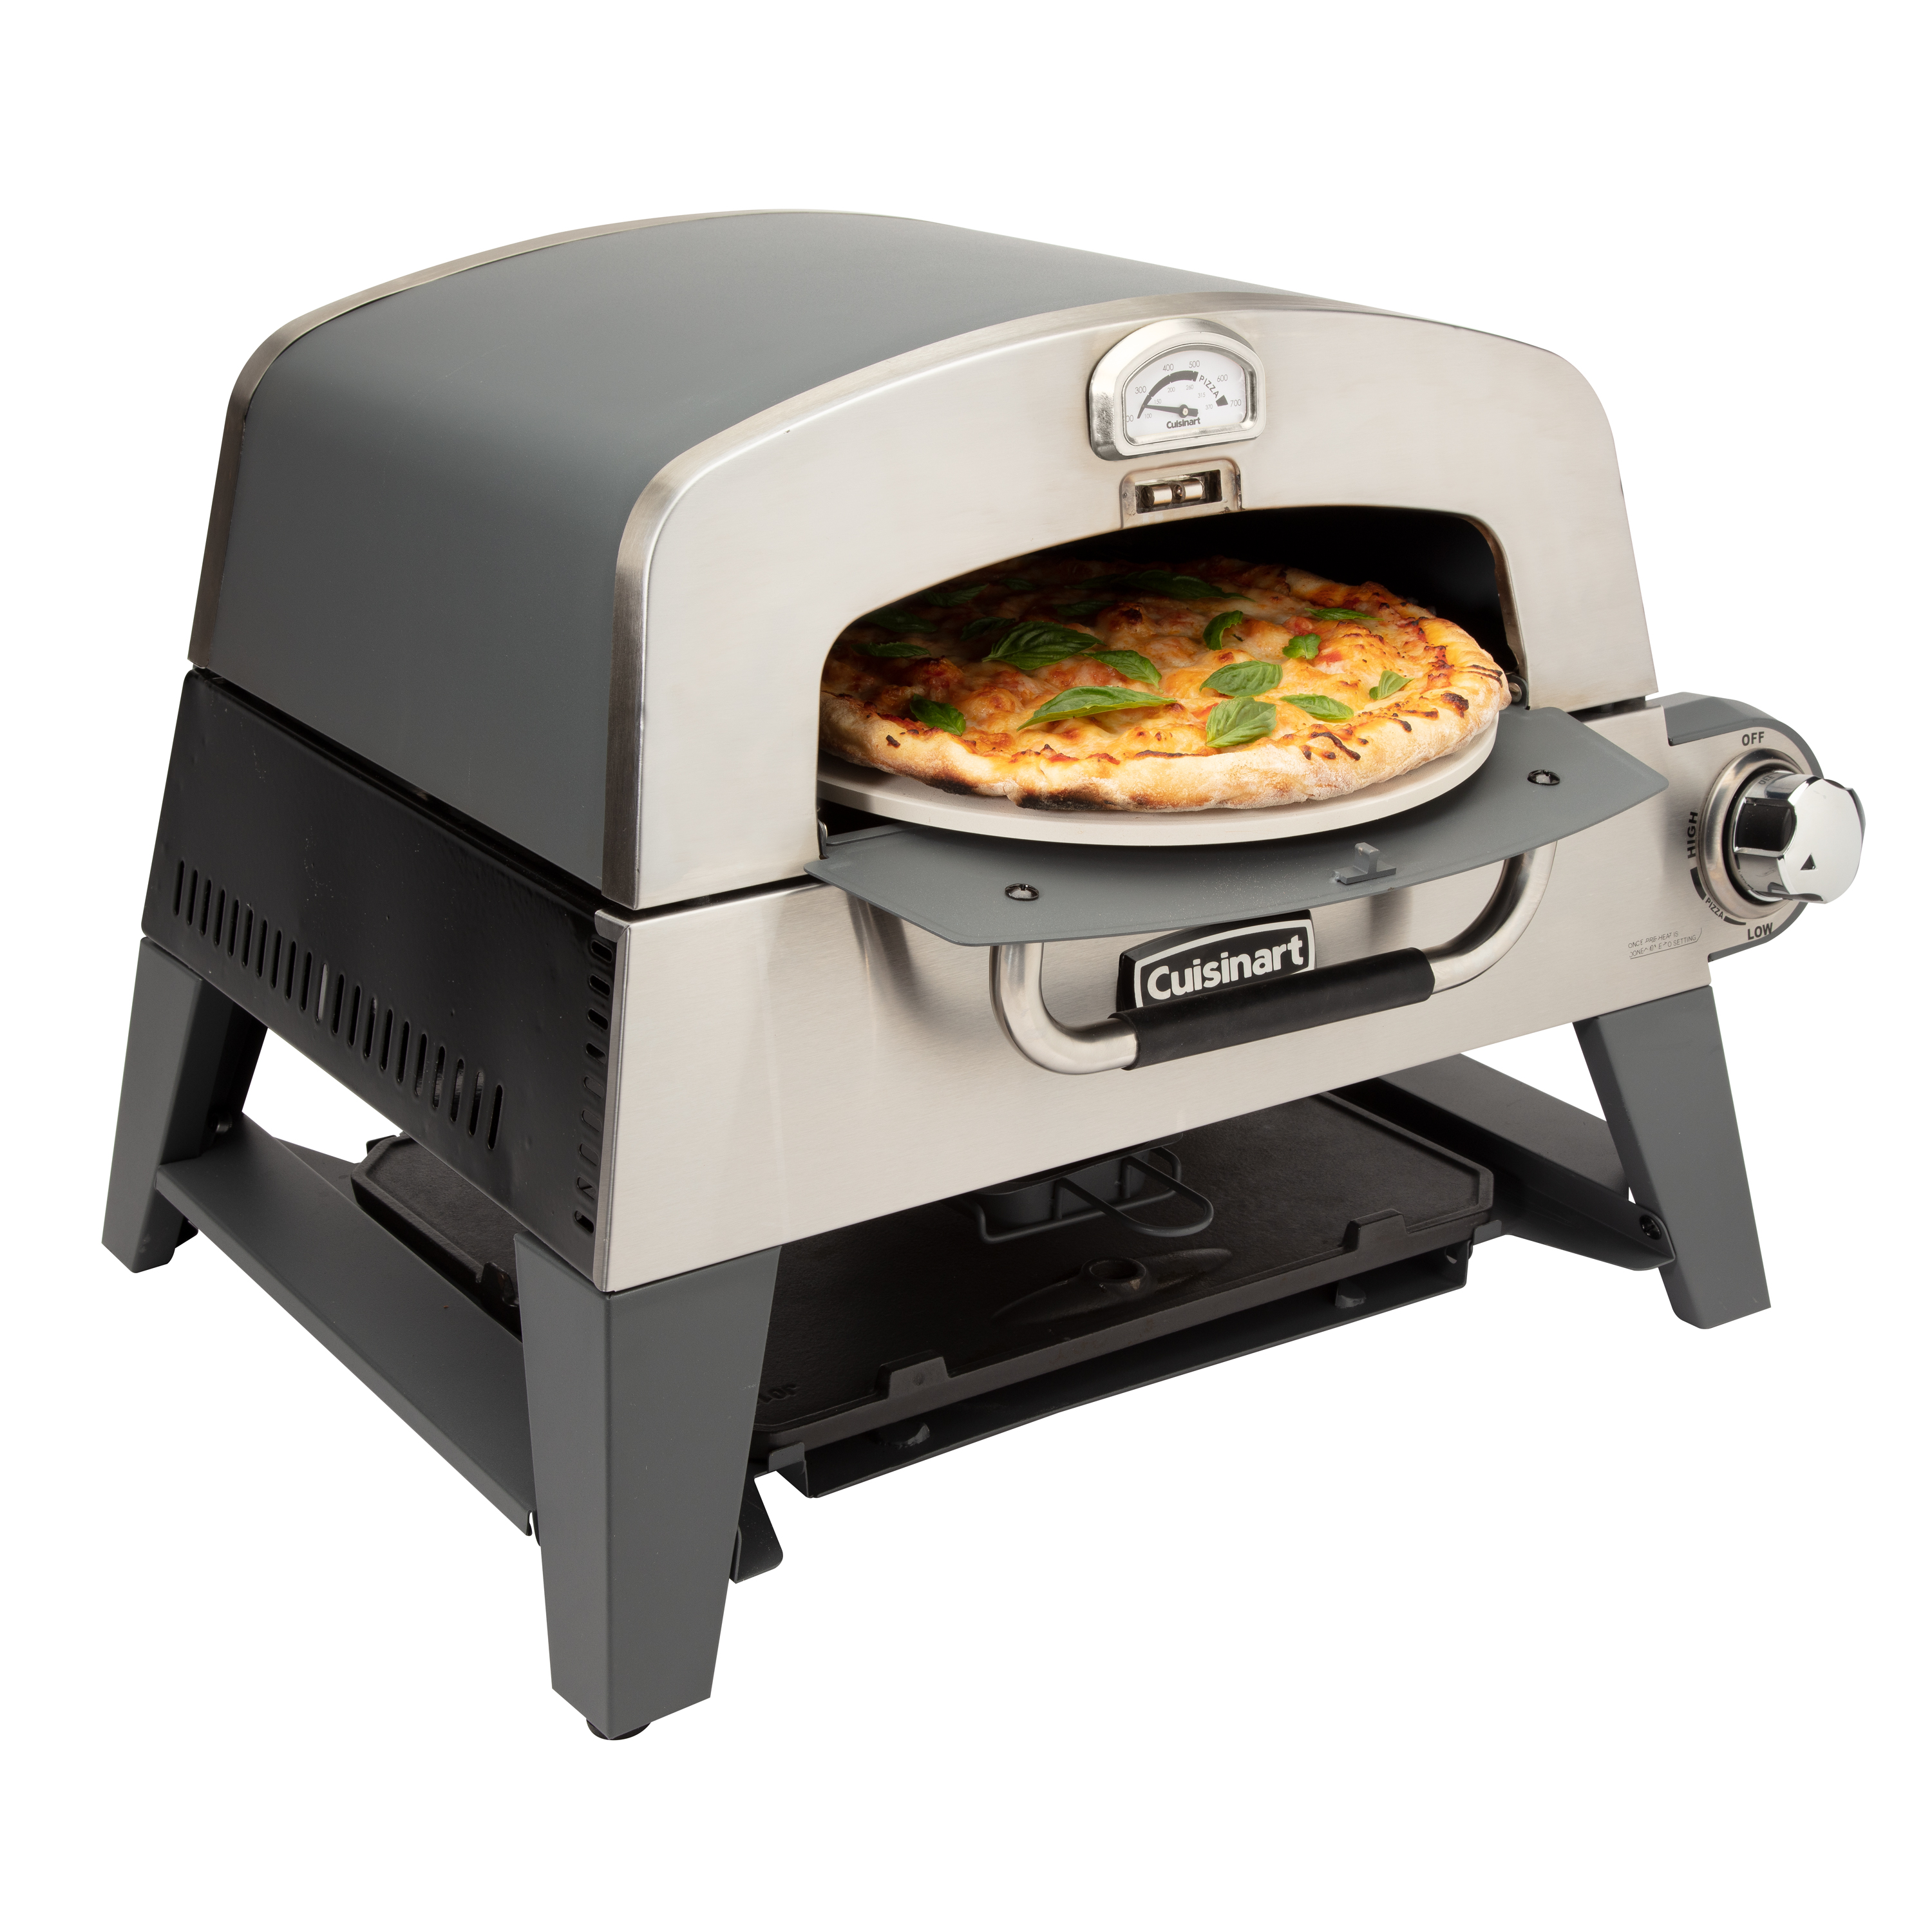 Cuisinart 3-in-1 Pizza Oven, Griddle, and Grill - image 1 of 11